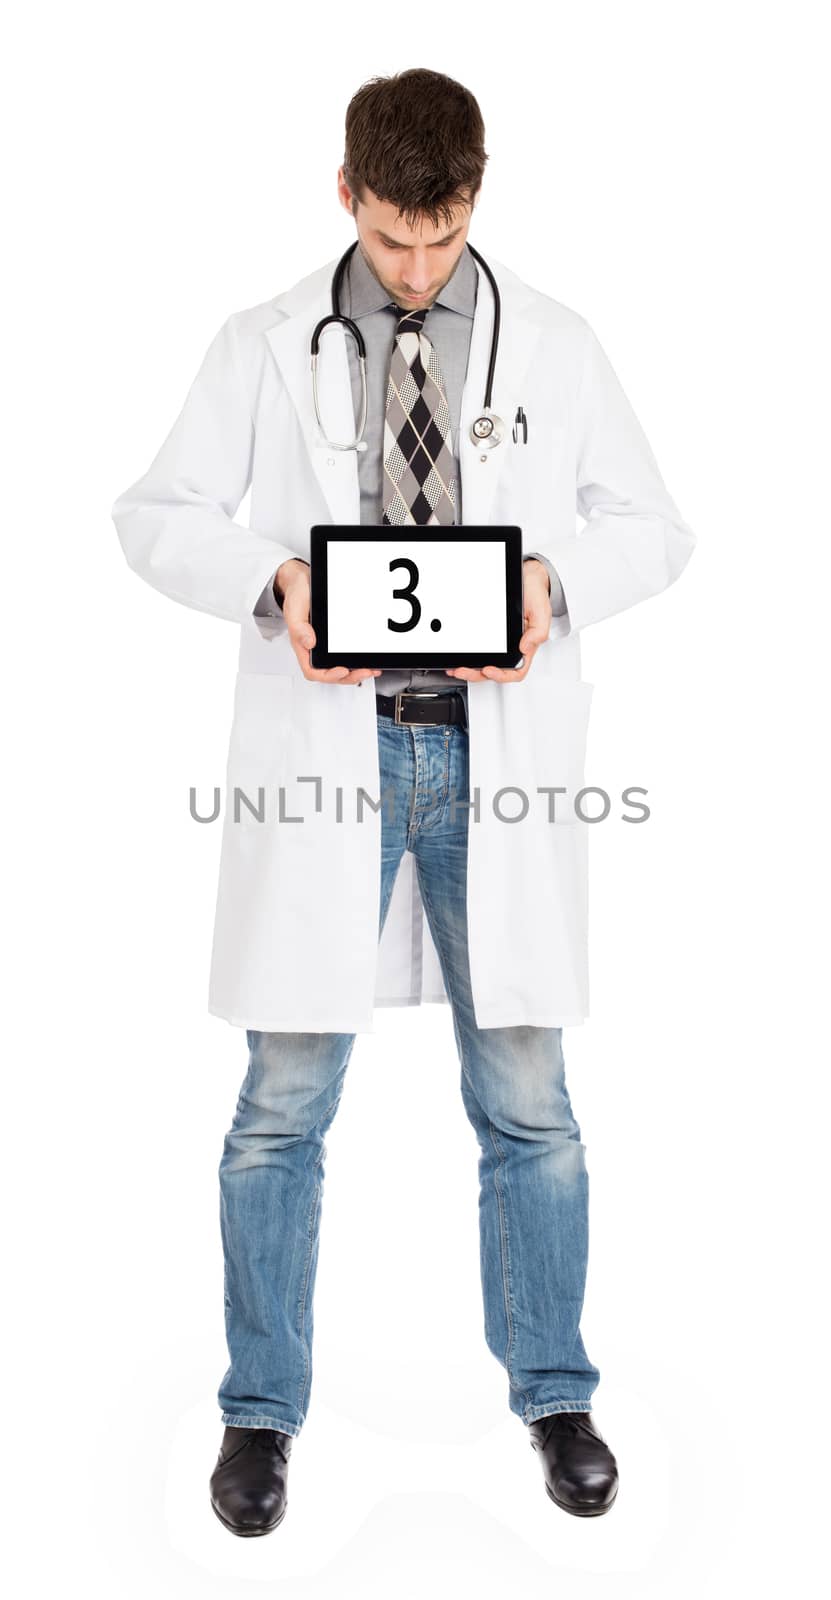 Doctor holding tablet, isolated on white - Number 3